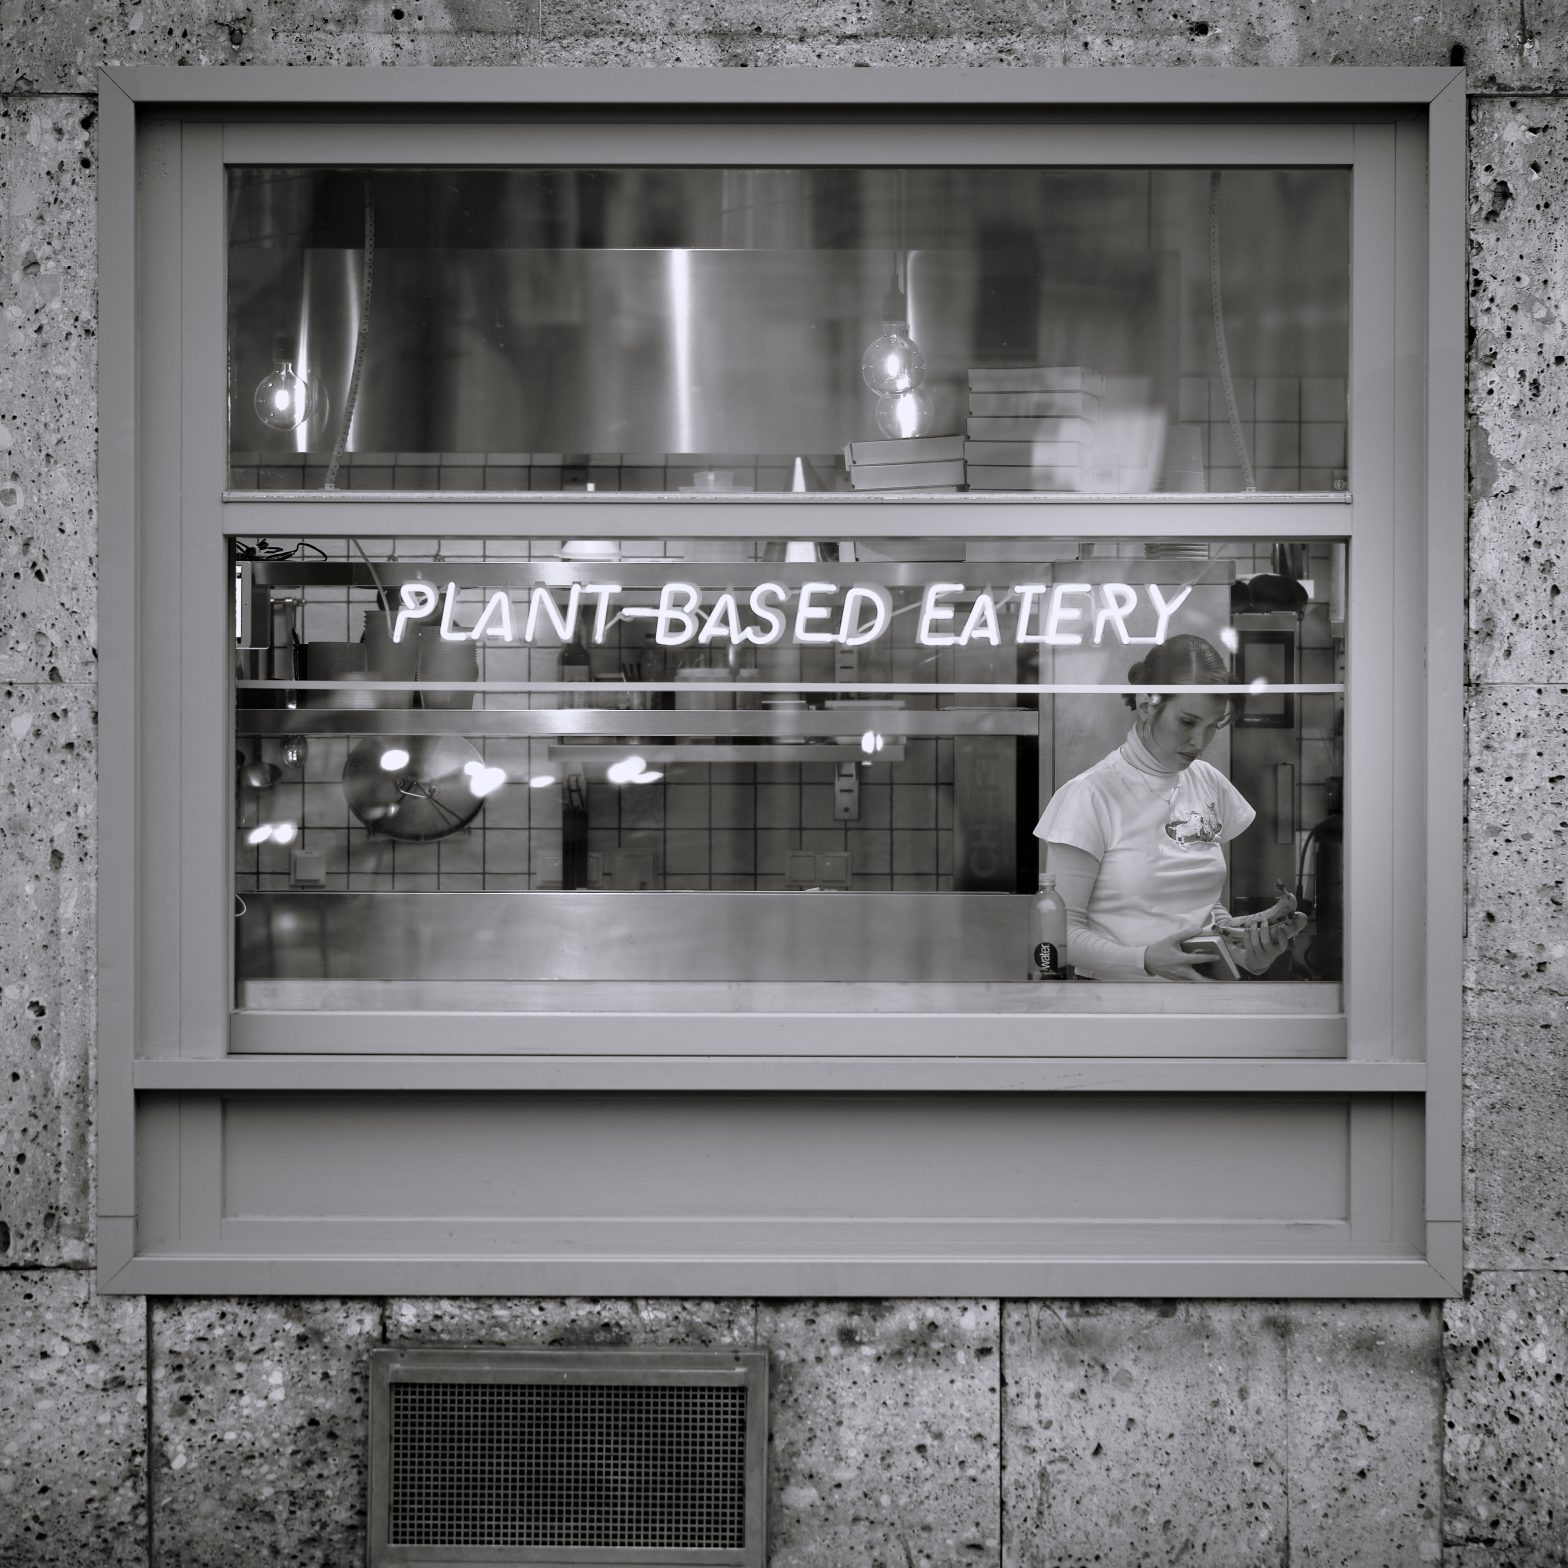 Plant Based Eatery